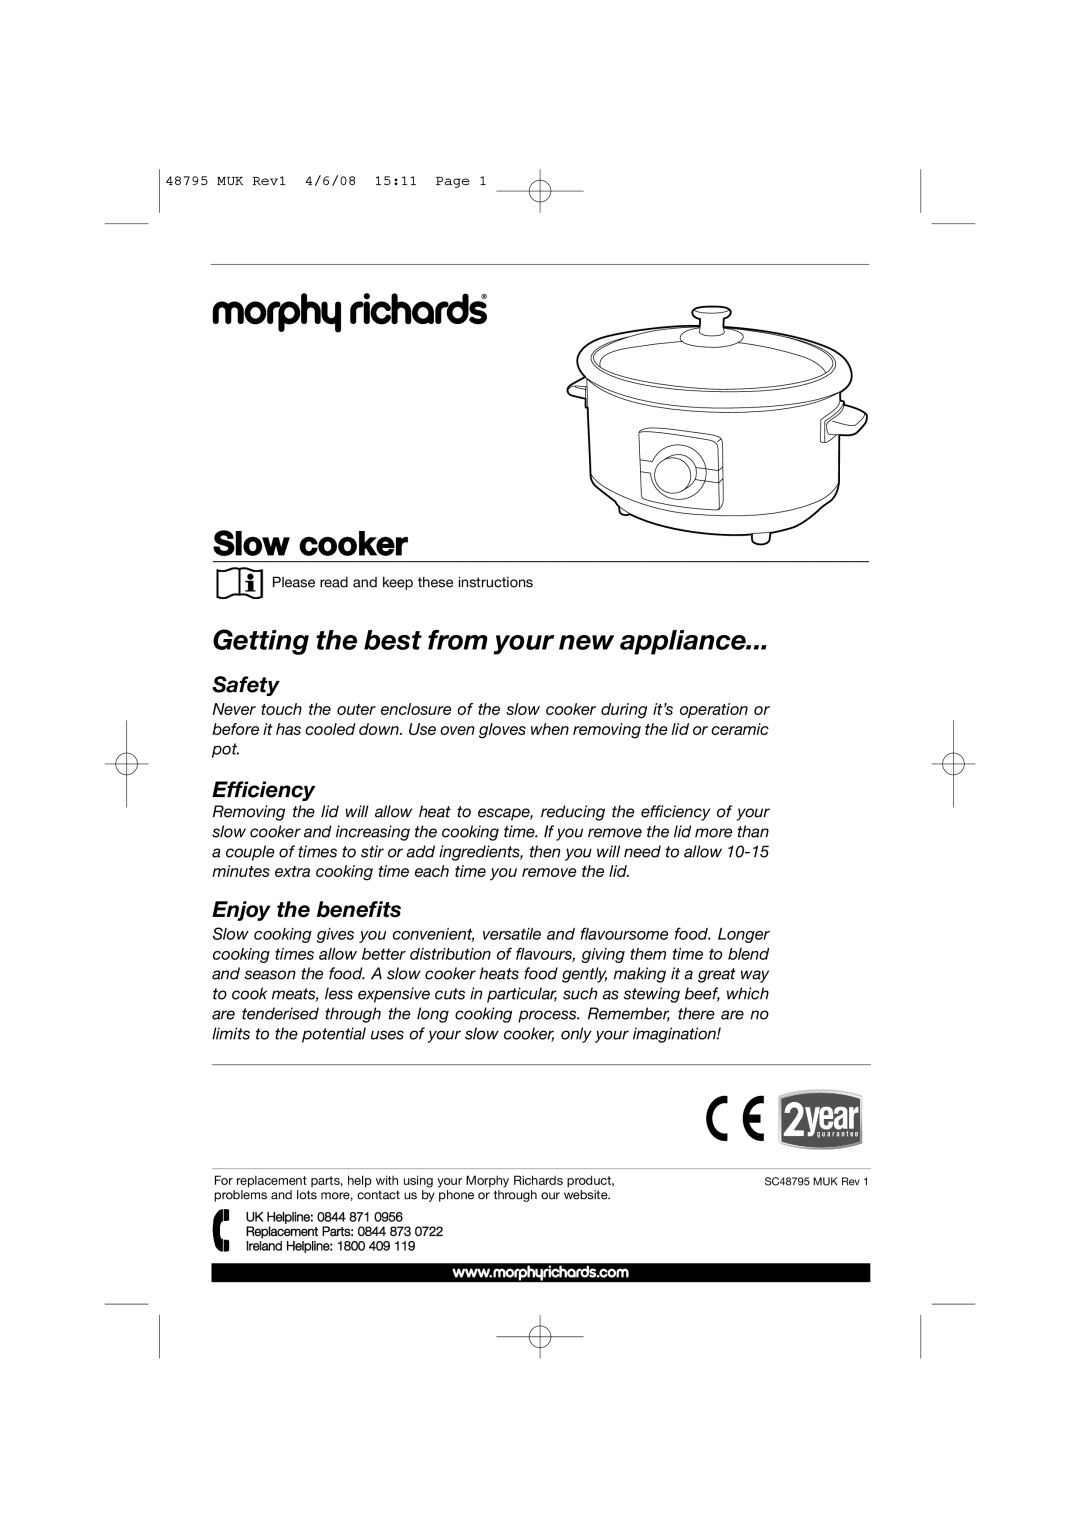 Morphy Richards 48795 manual Slow cooker, Getting the best from your new appliance, Safety, Efficiency, Enjoy the benefits 